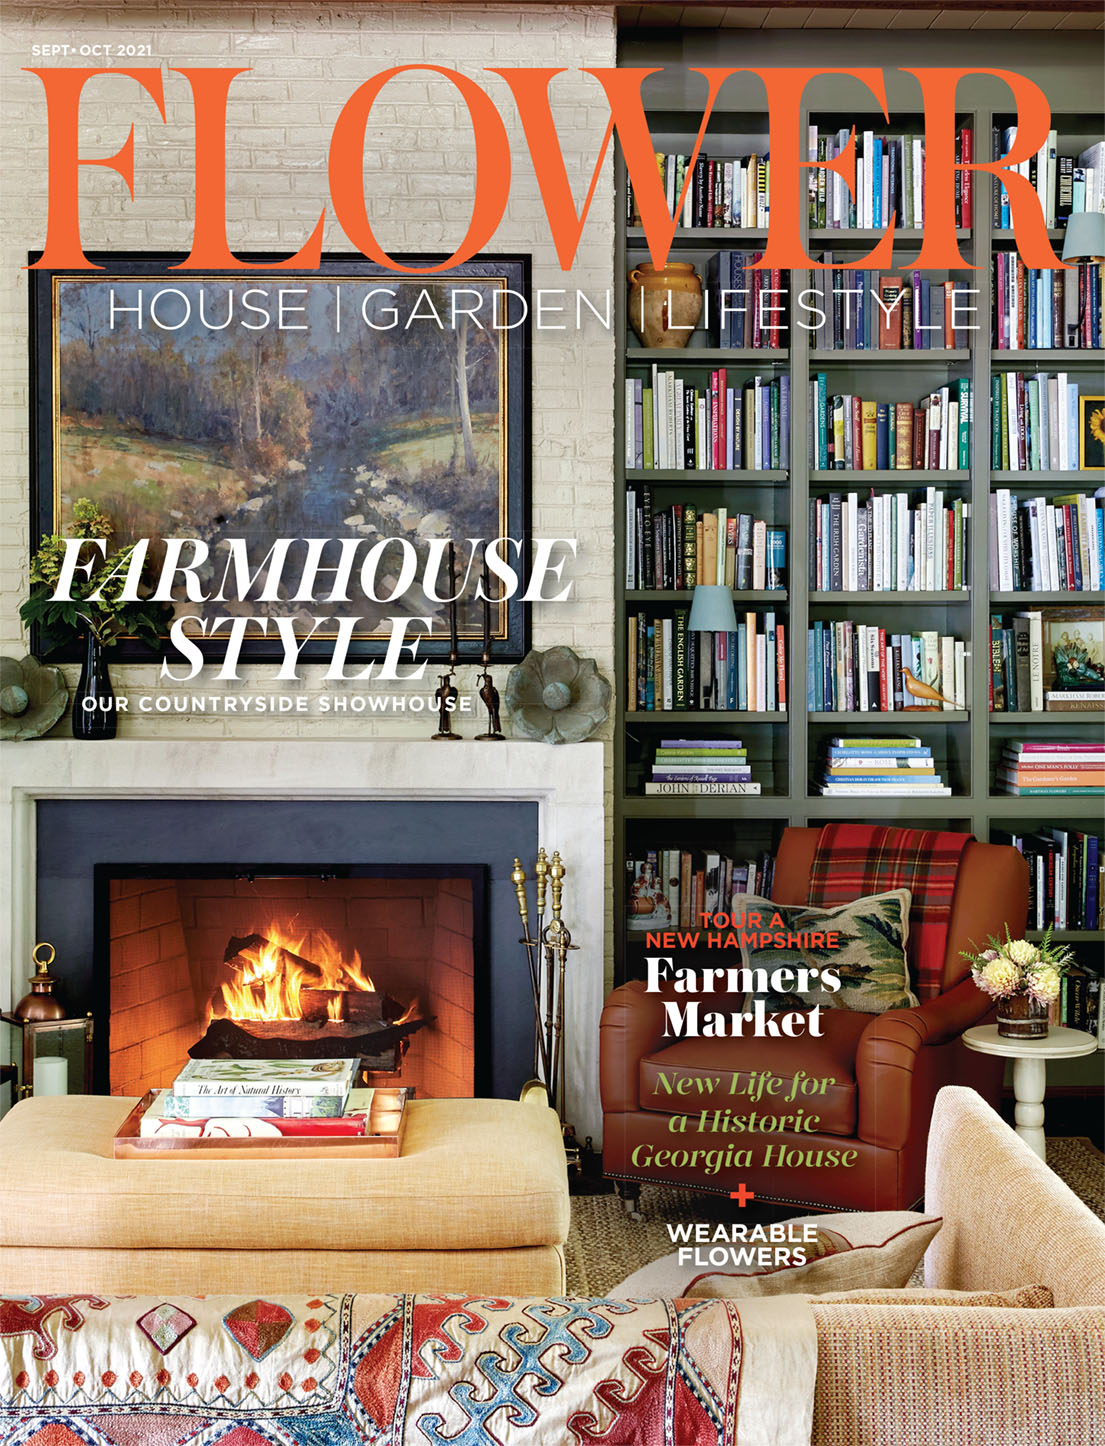 On the Cover: The inviting living room at Brierfield Farm, our countryside showhouse, exudes warm and comfort with a palette that takes its cue from the surrounding setting. Photographed by David Hillegas.